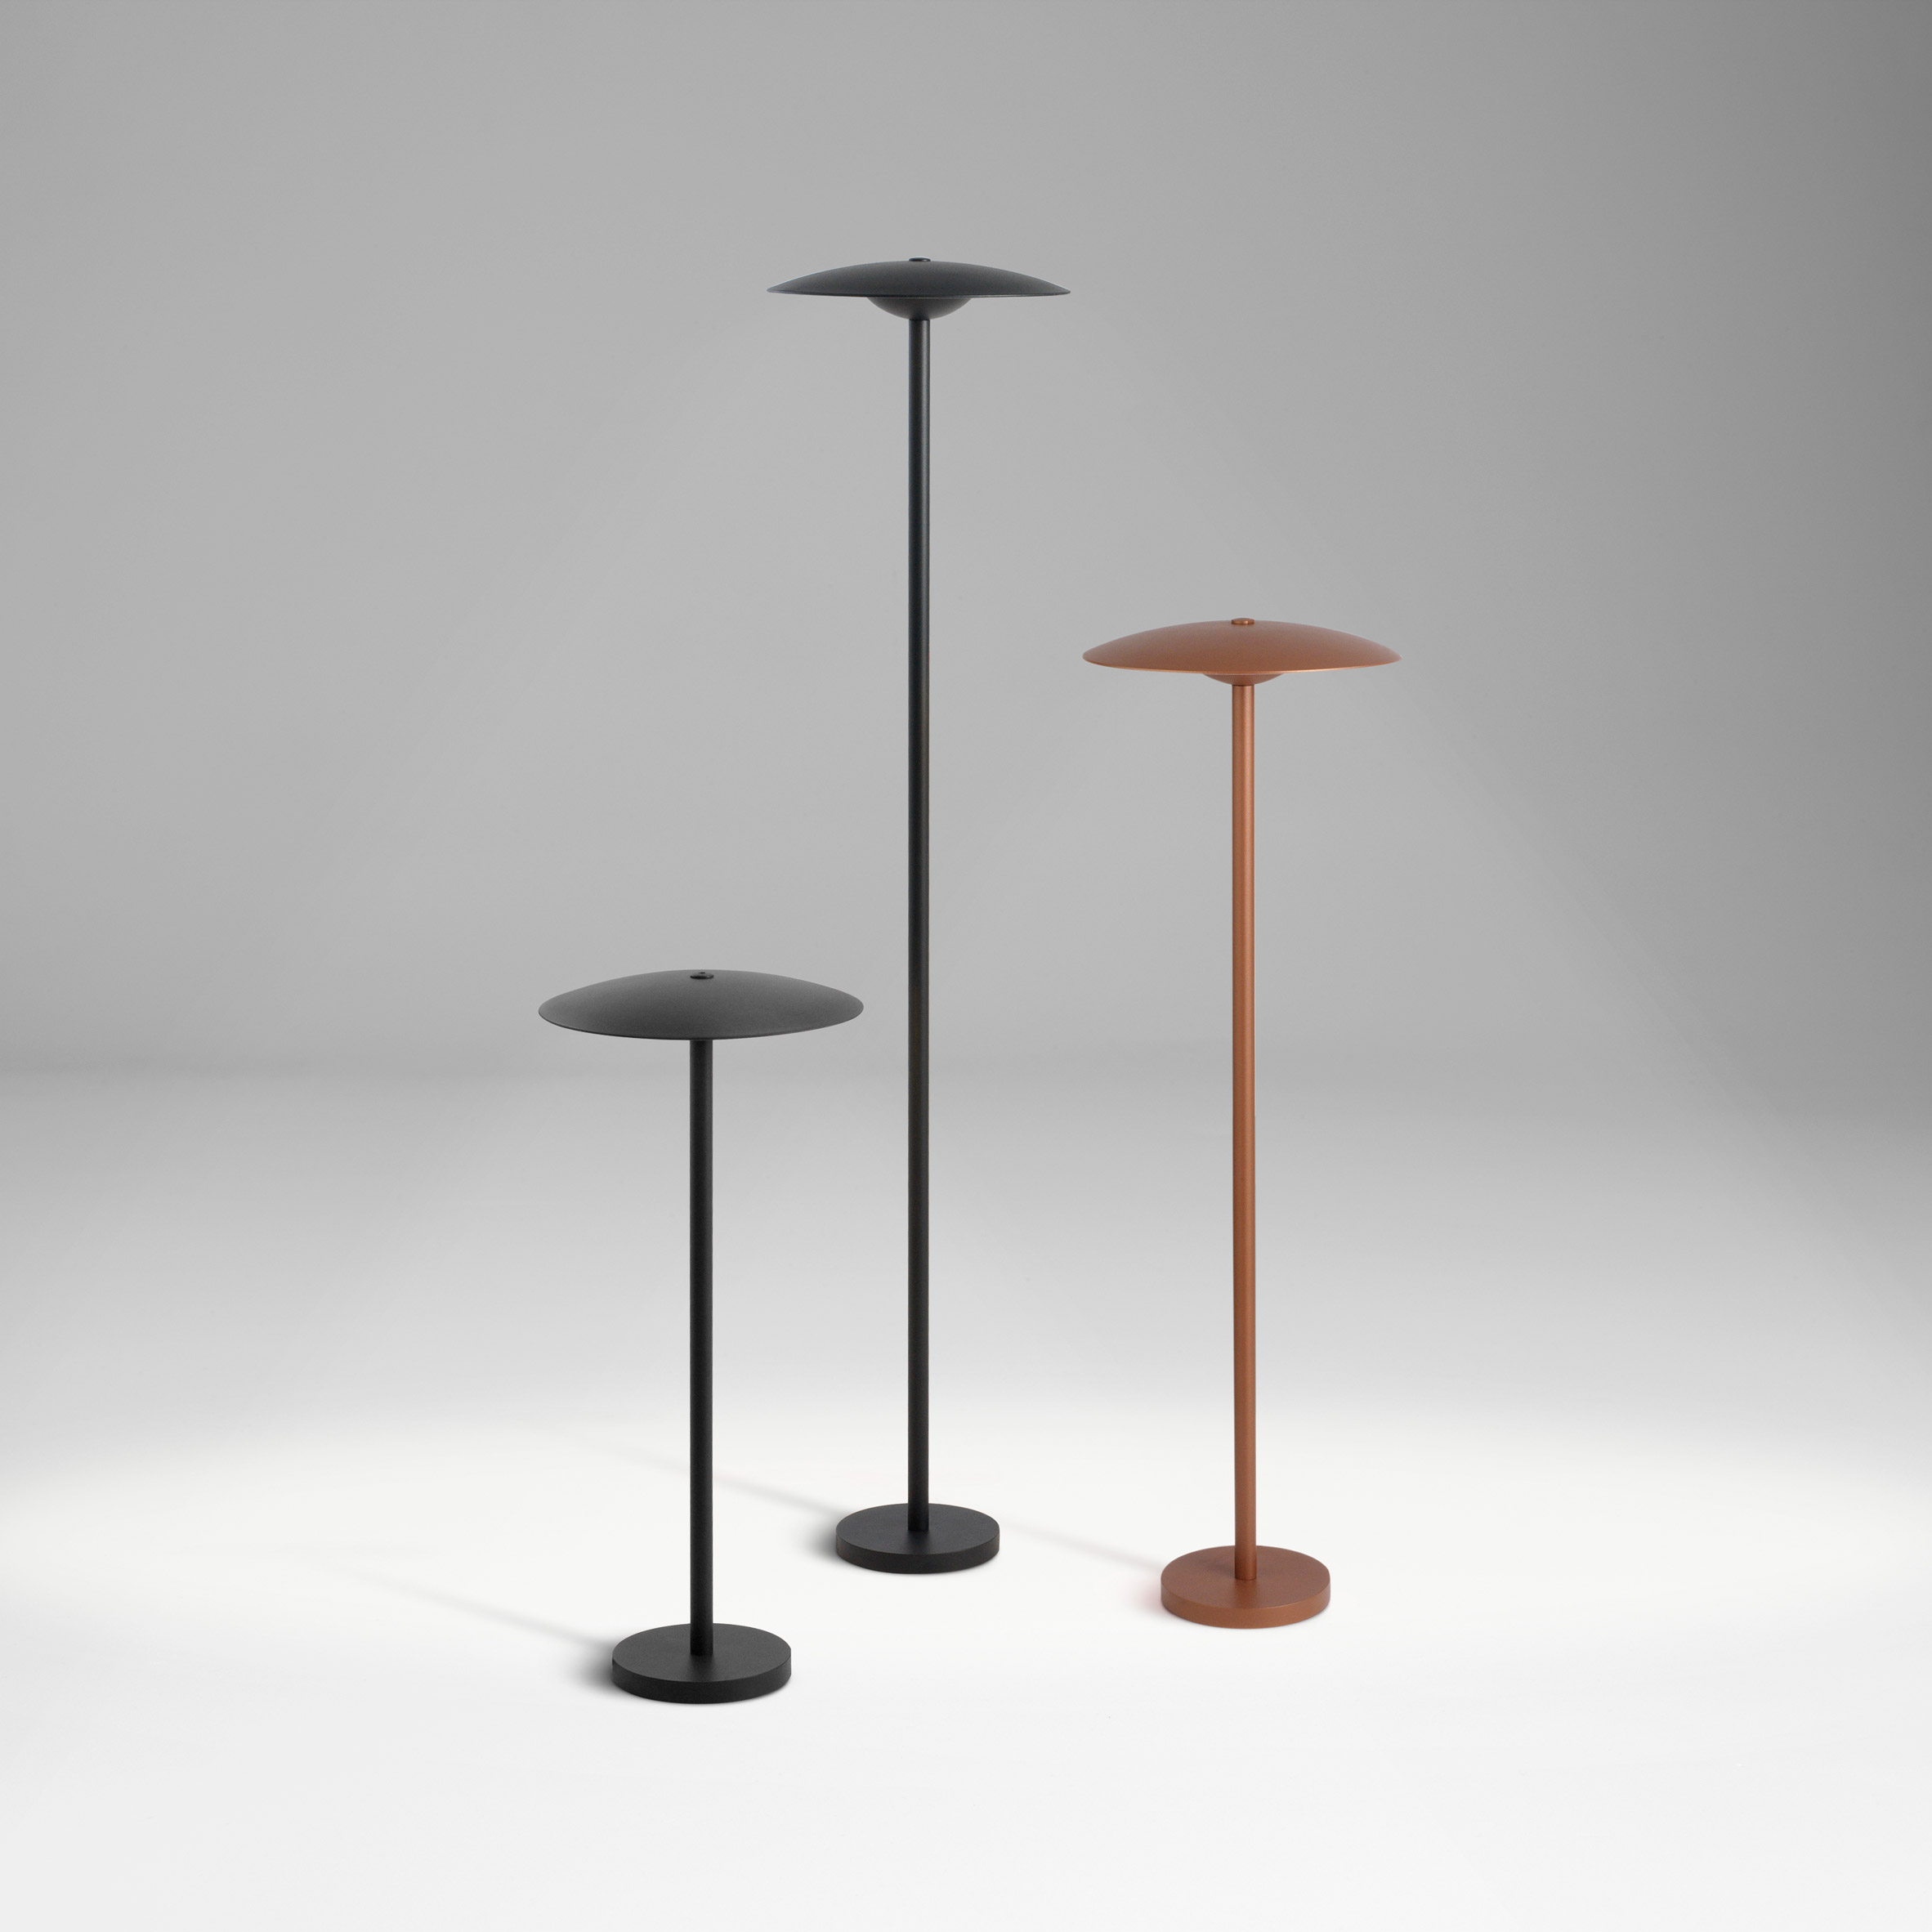 Three Ginger bollard outdoor lamps by Marset